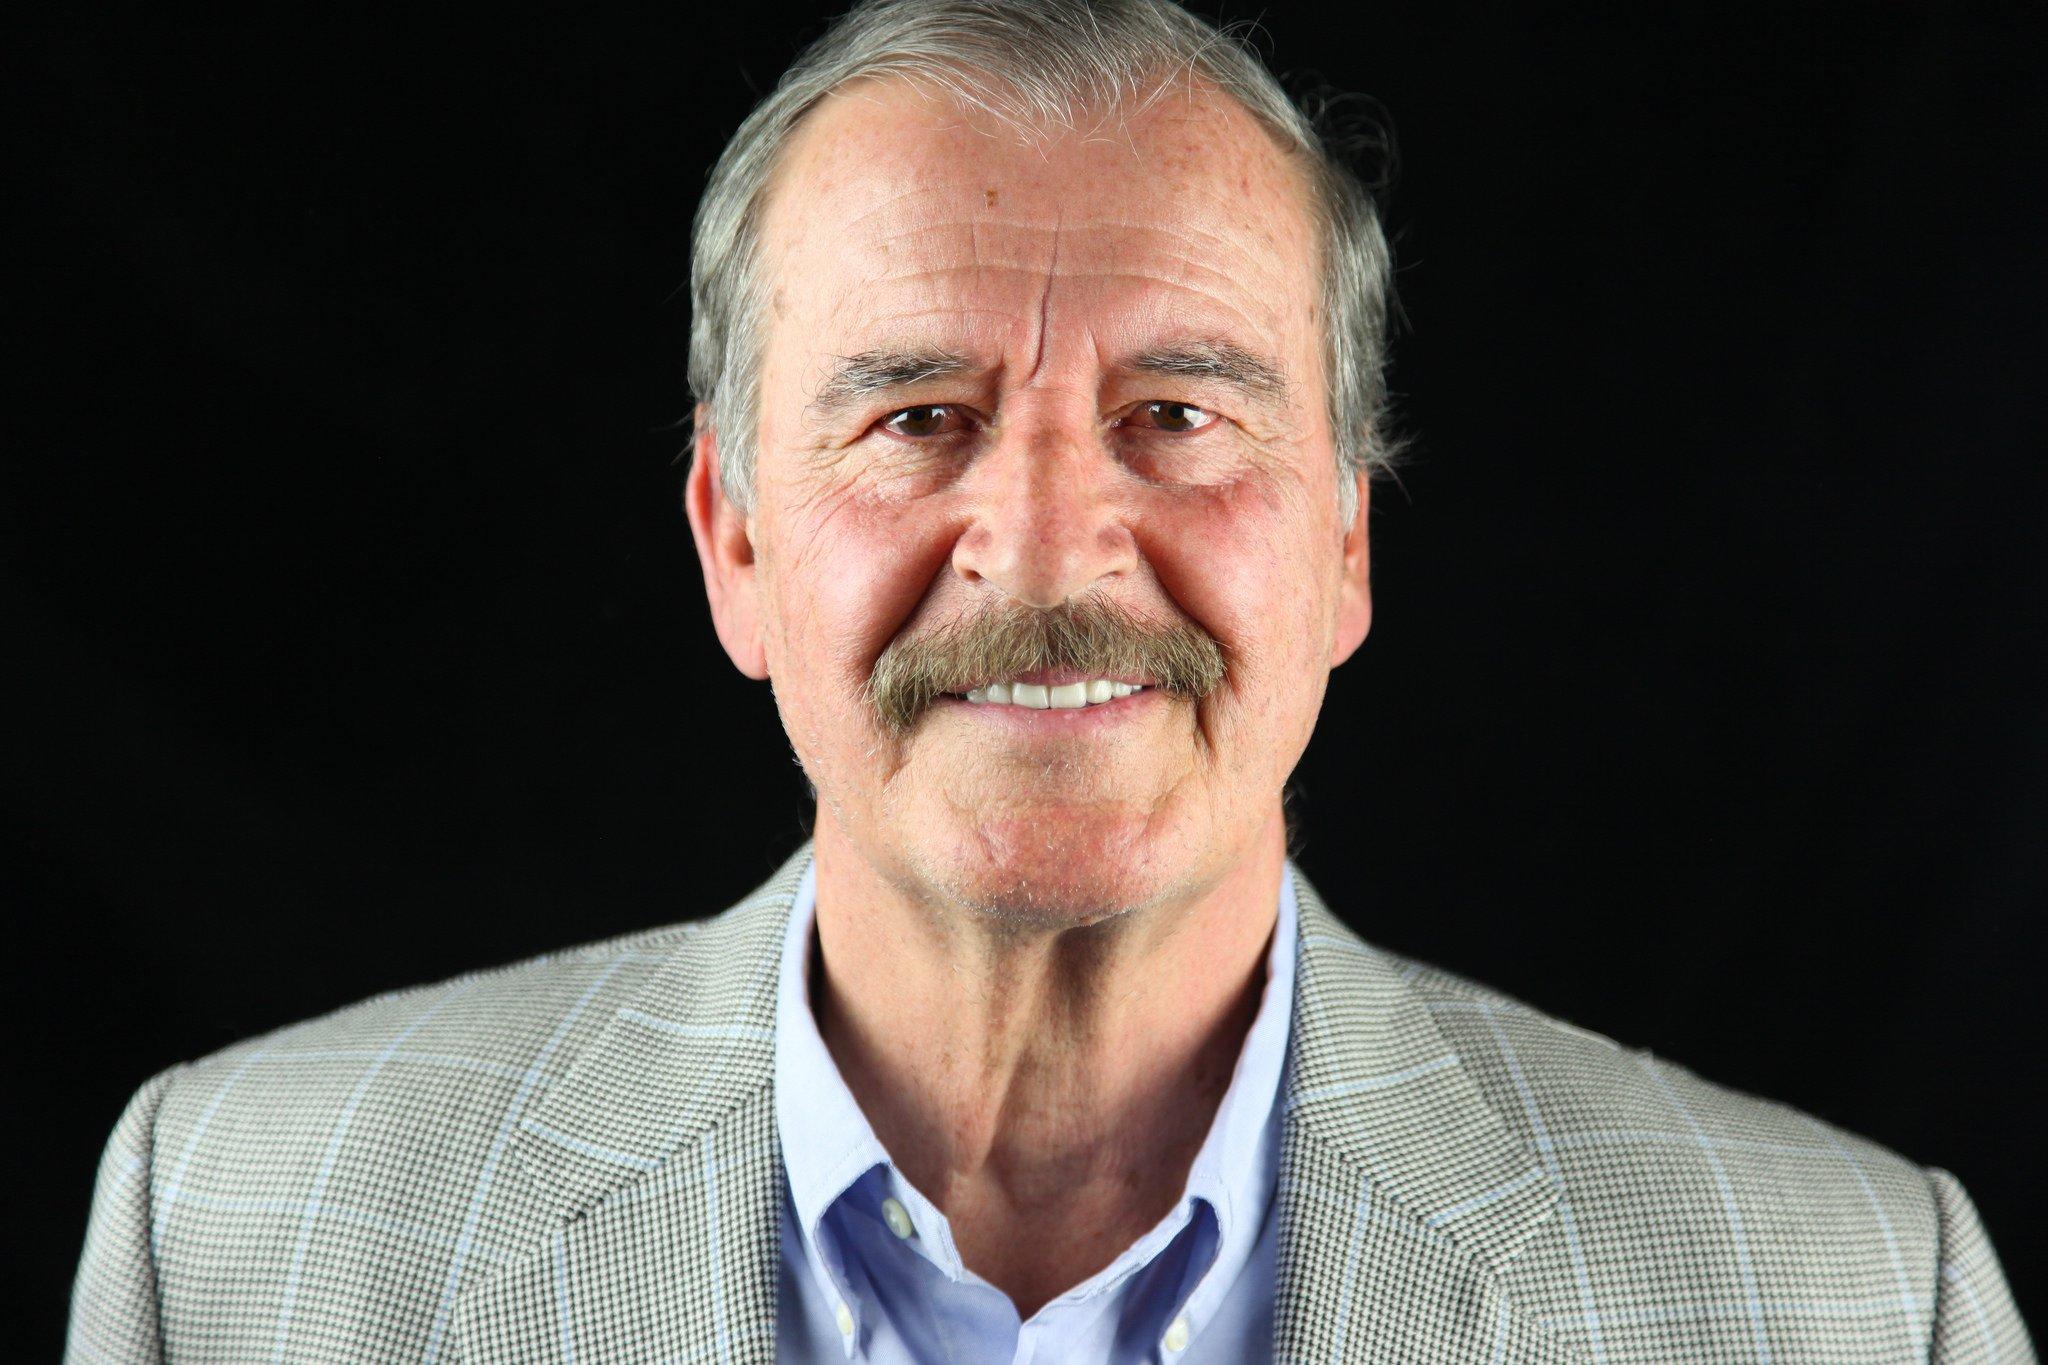 Vicente Fox : Vicente Fox Ethnicity Of Celebs What Nationality Ancestry ...